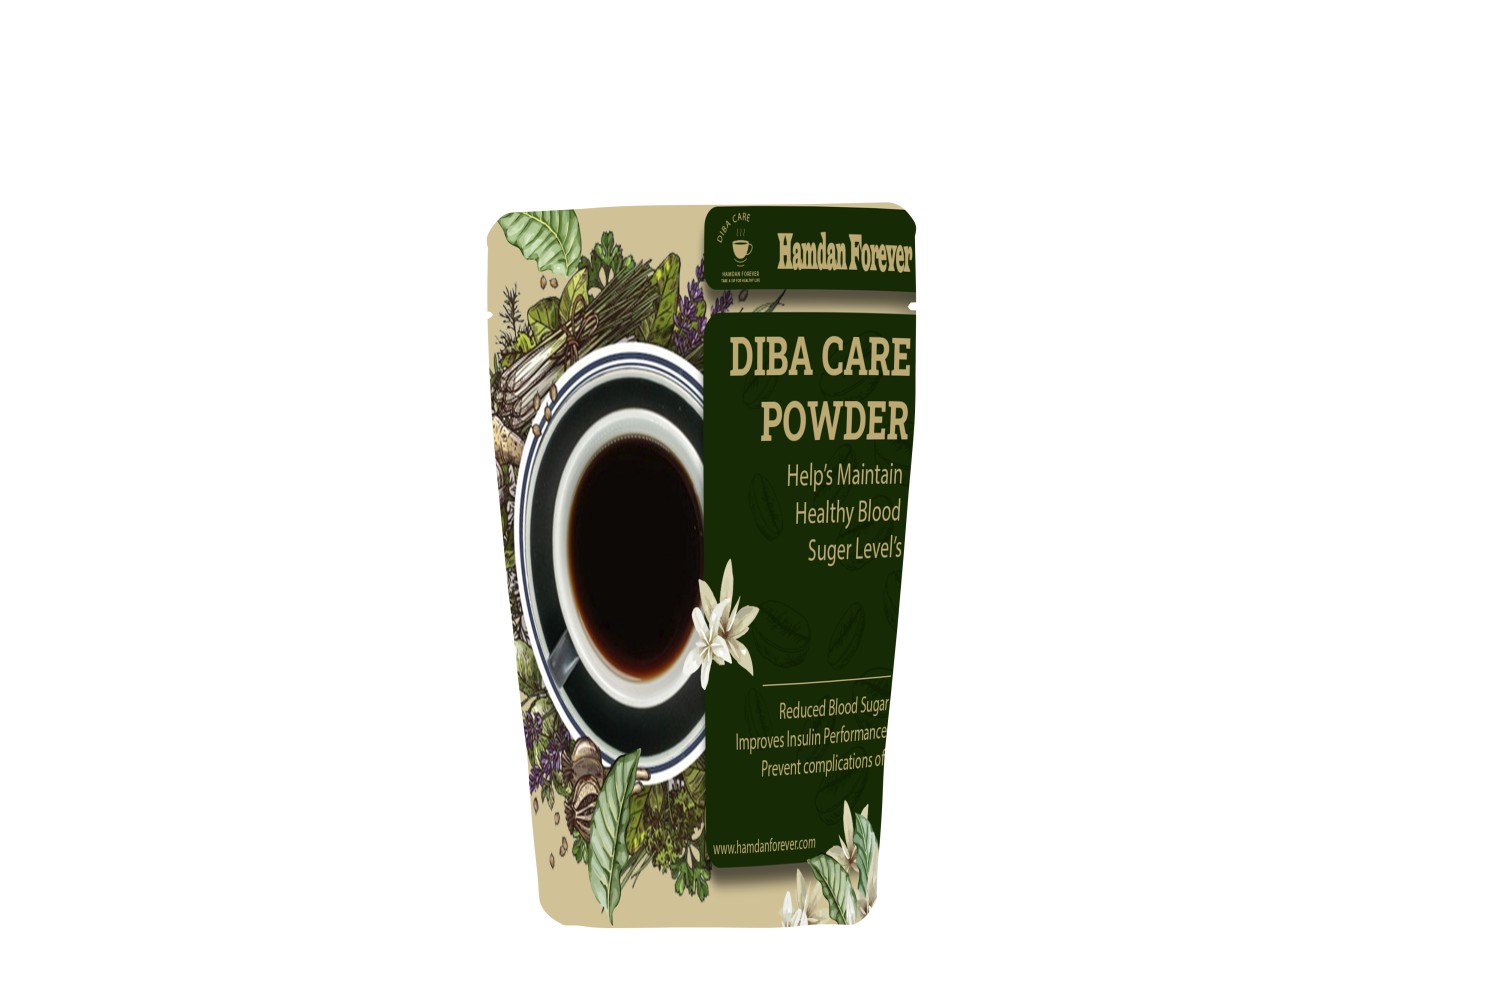 Diba Care- Diabetes Care  Reduce Blood-Sugar by 30% In Just 1 months*  If you are looking for a NATURAL solution to Diabetes